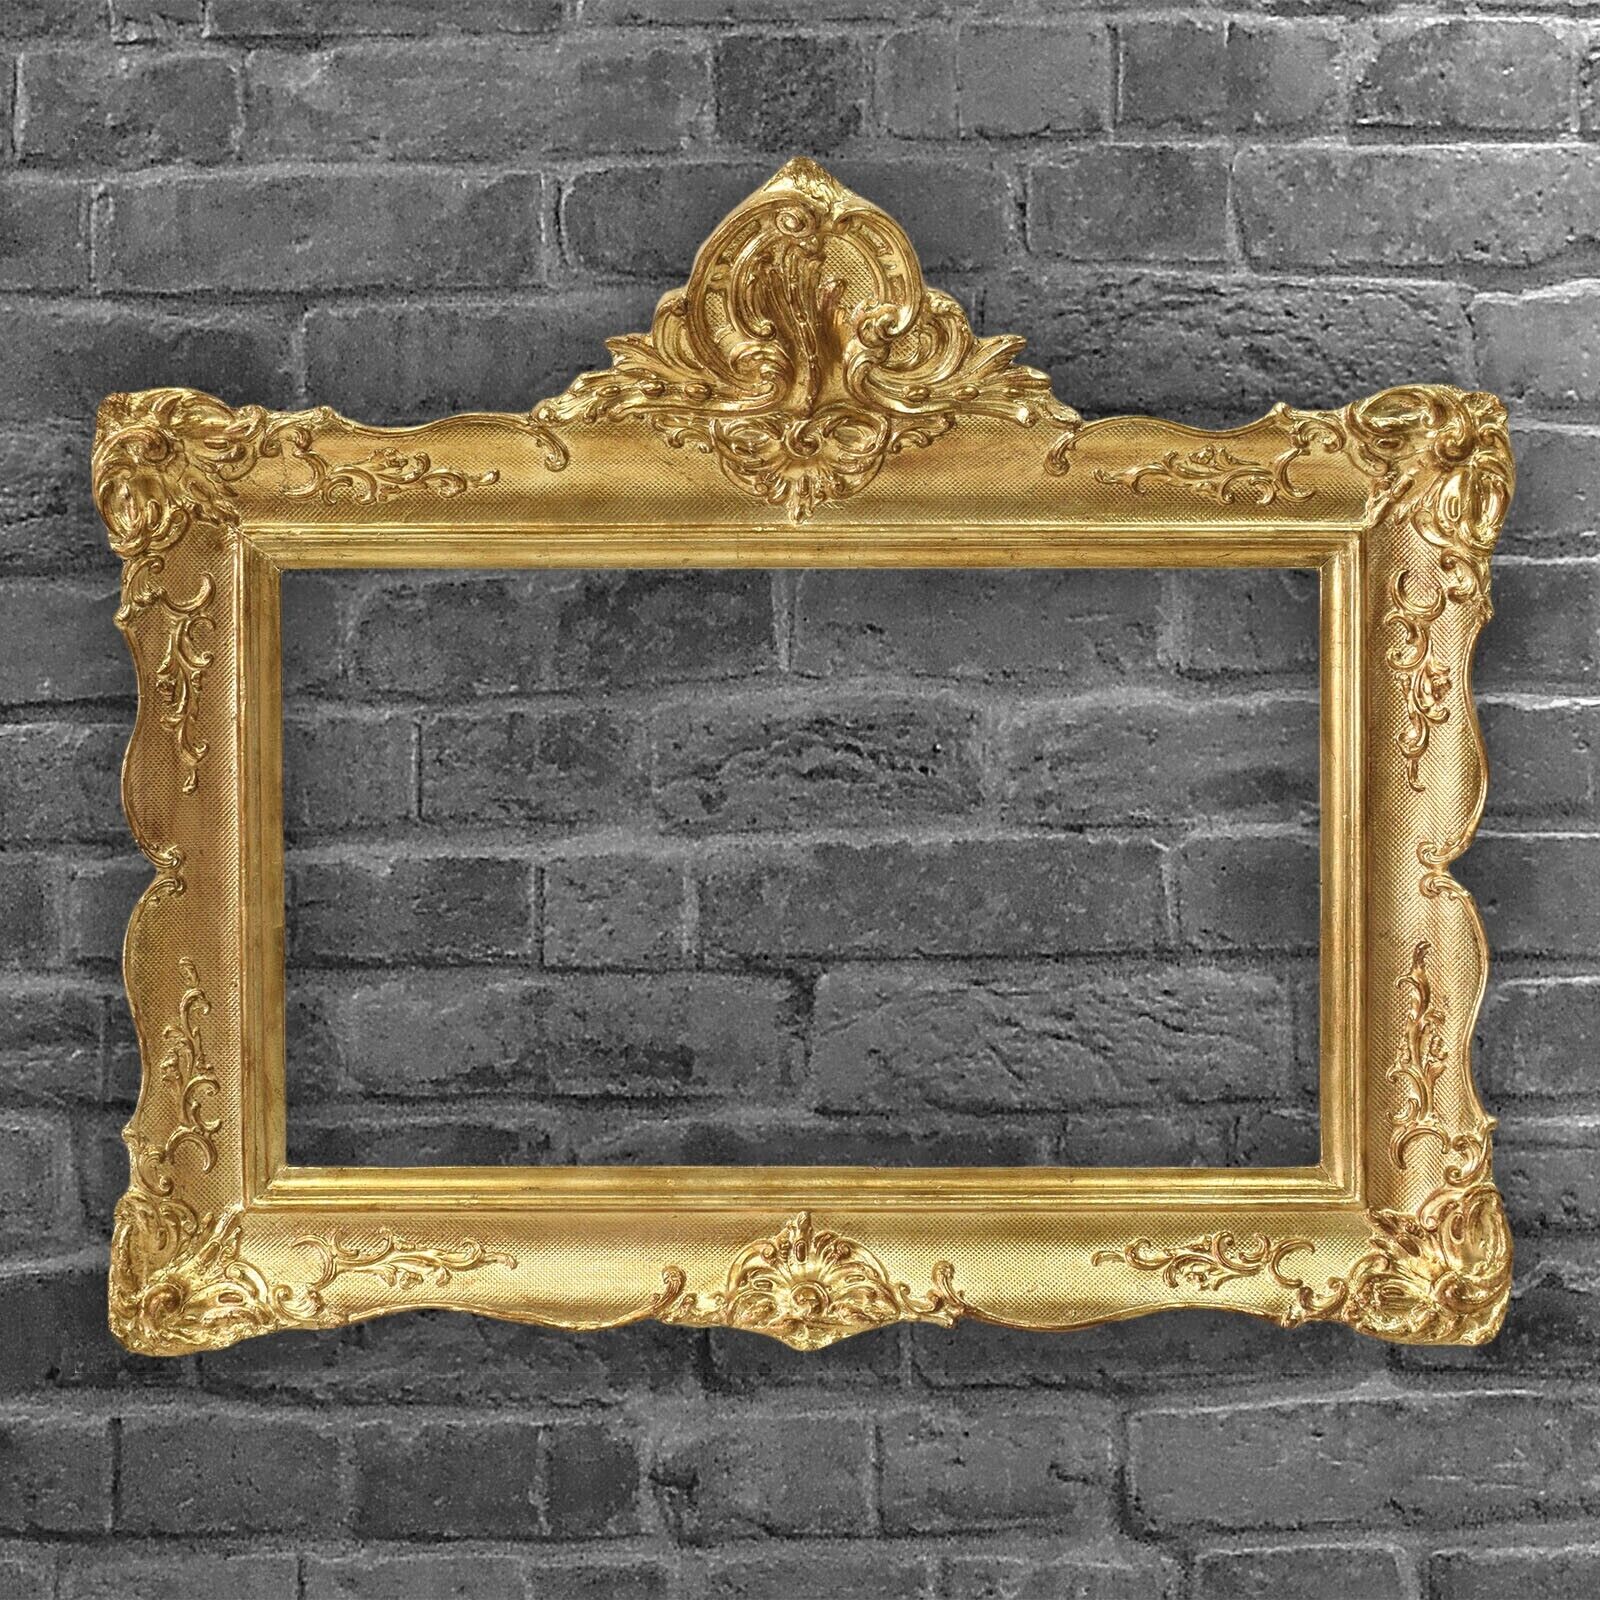 19th century Old wooden picture frame, mirror frame, dimensions: 25 x 14.9 in